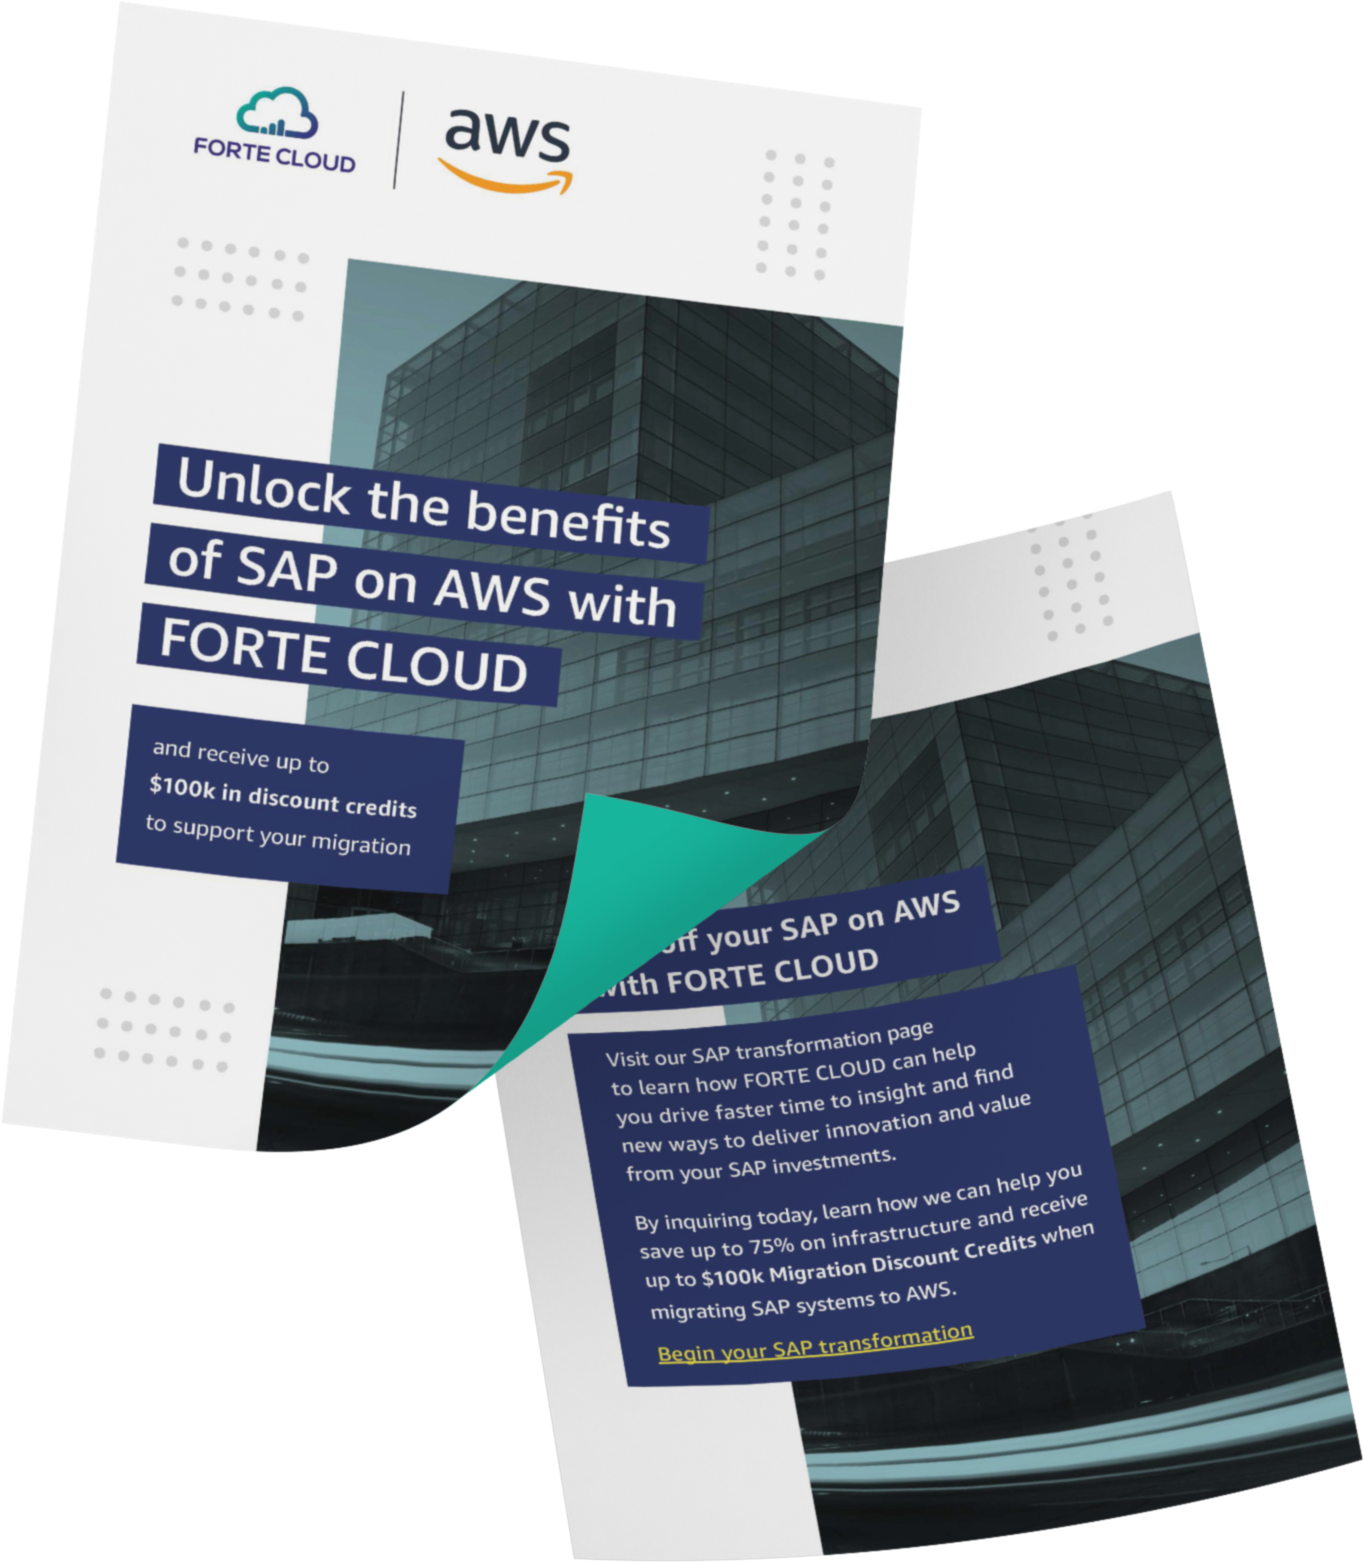 Unlock the benefits of SAP on AWS with FORTE CLOUD